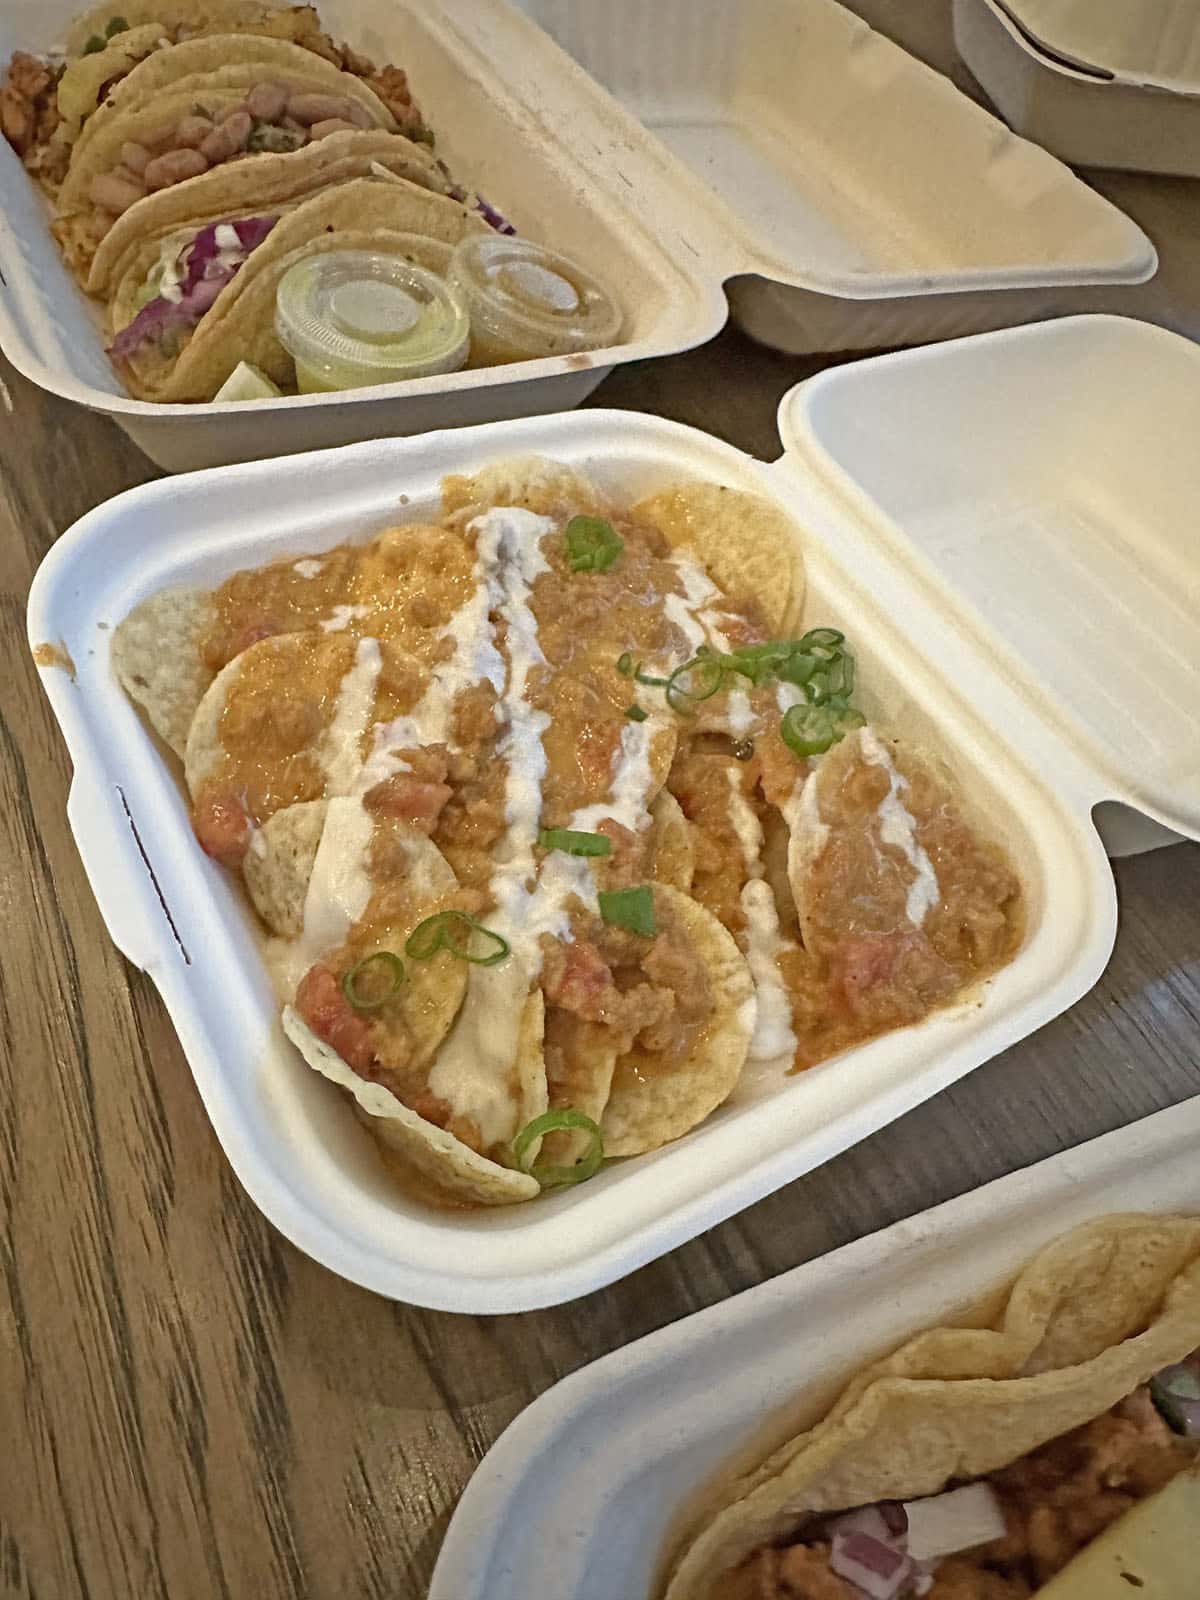 Nachos with crema drizzle in cardboard container.